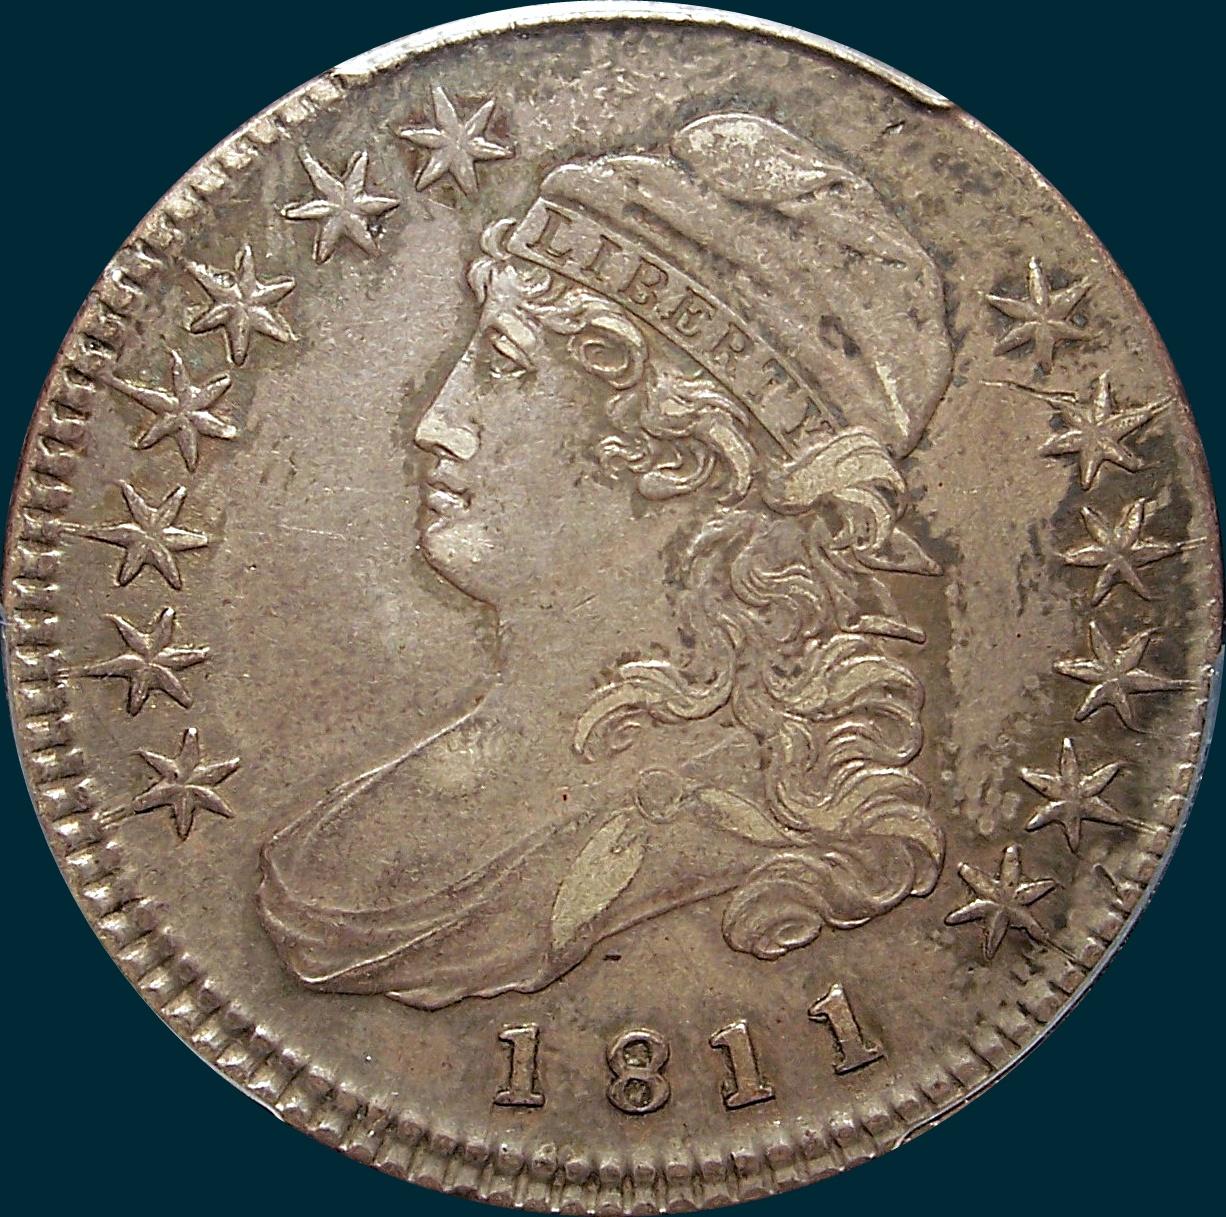 1811, O-107, Small 8, Capped Bust, Half Dollar